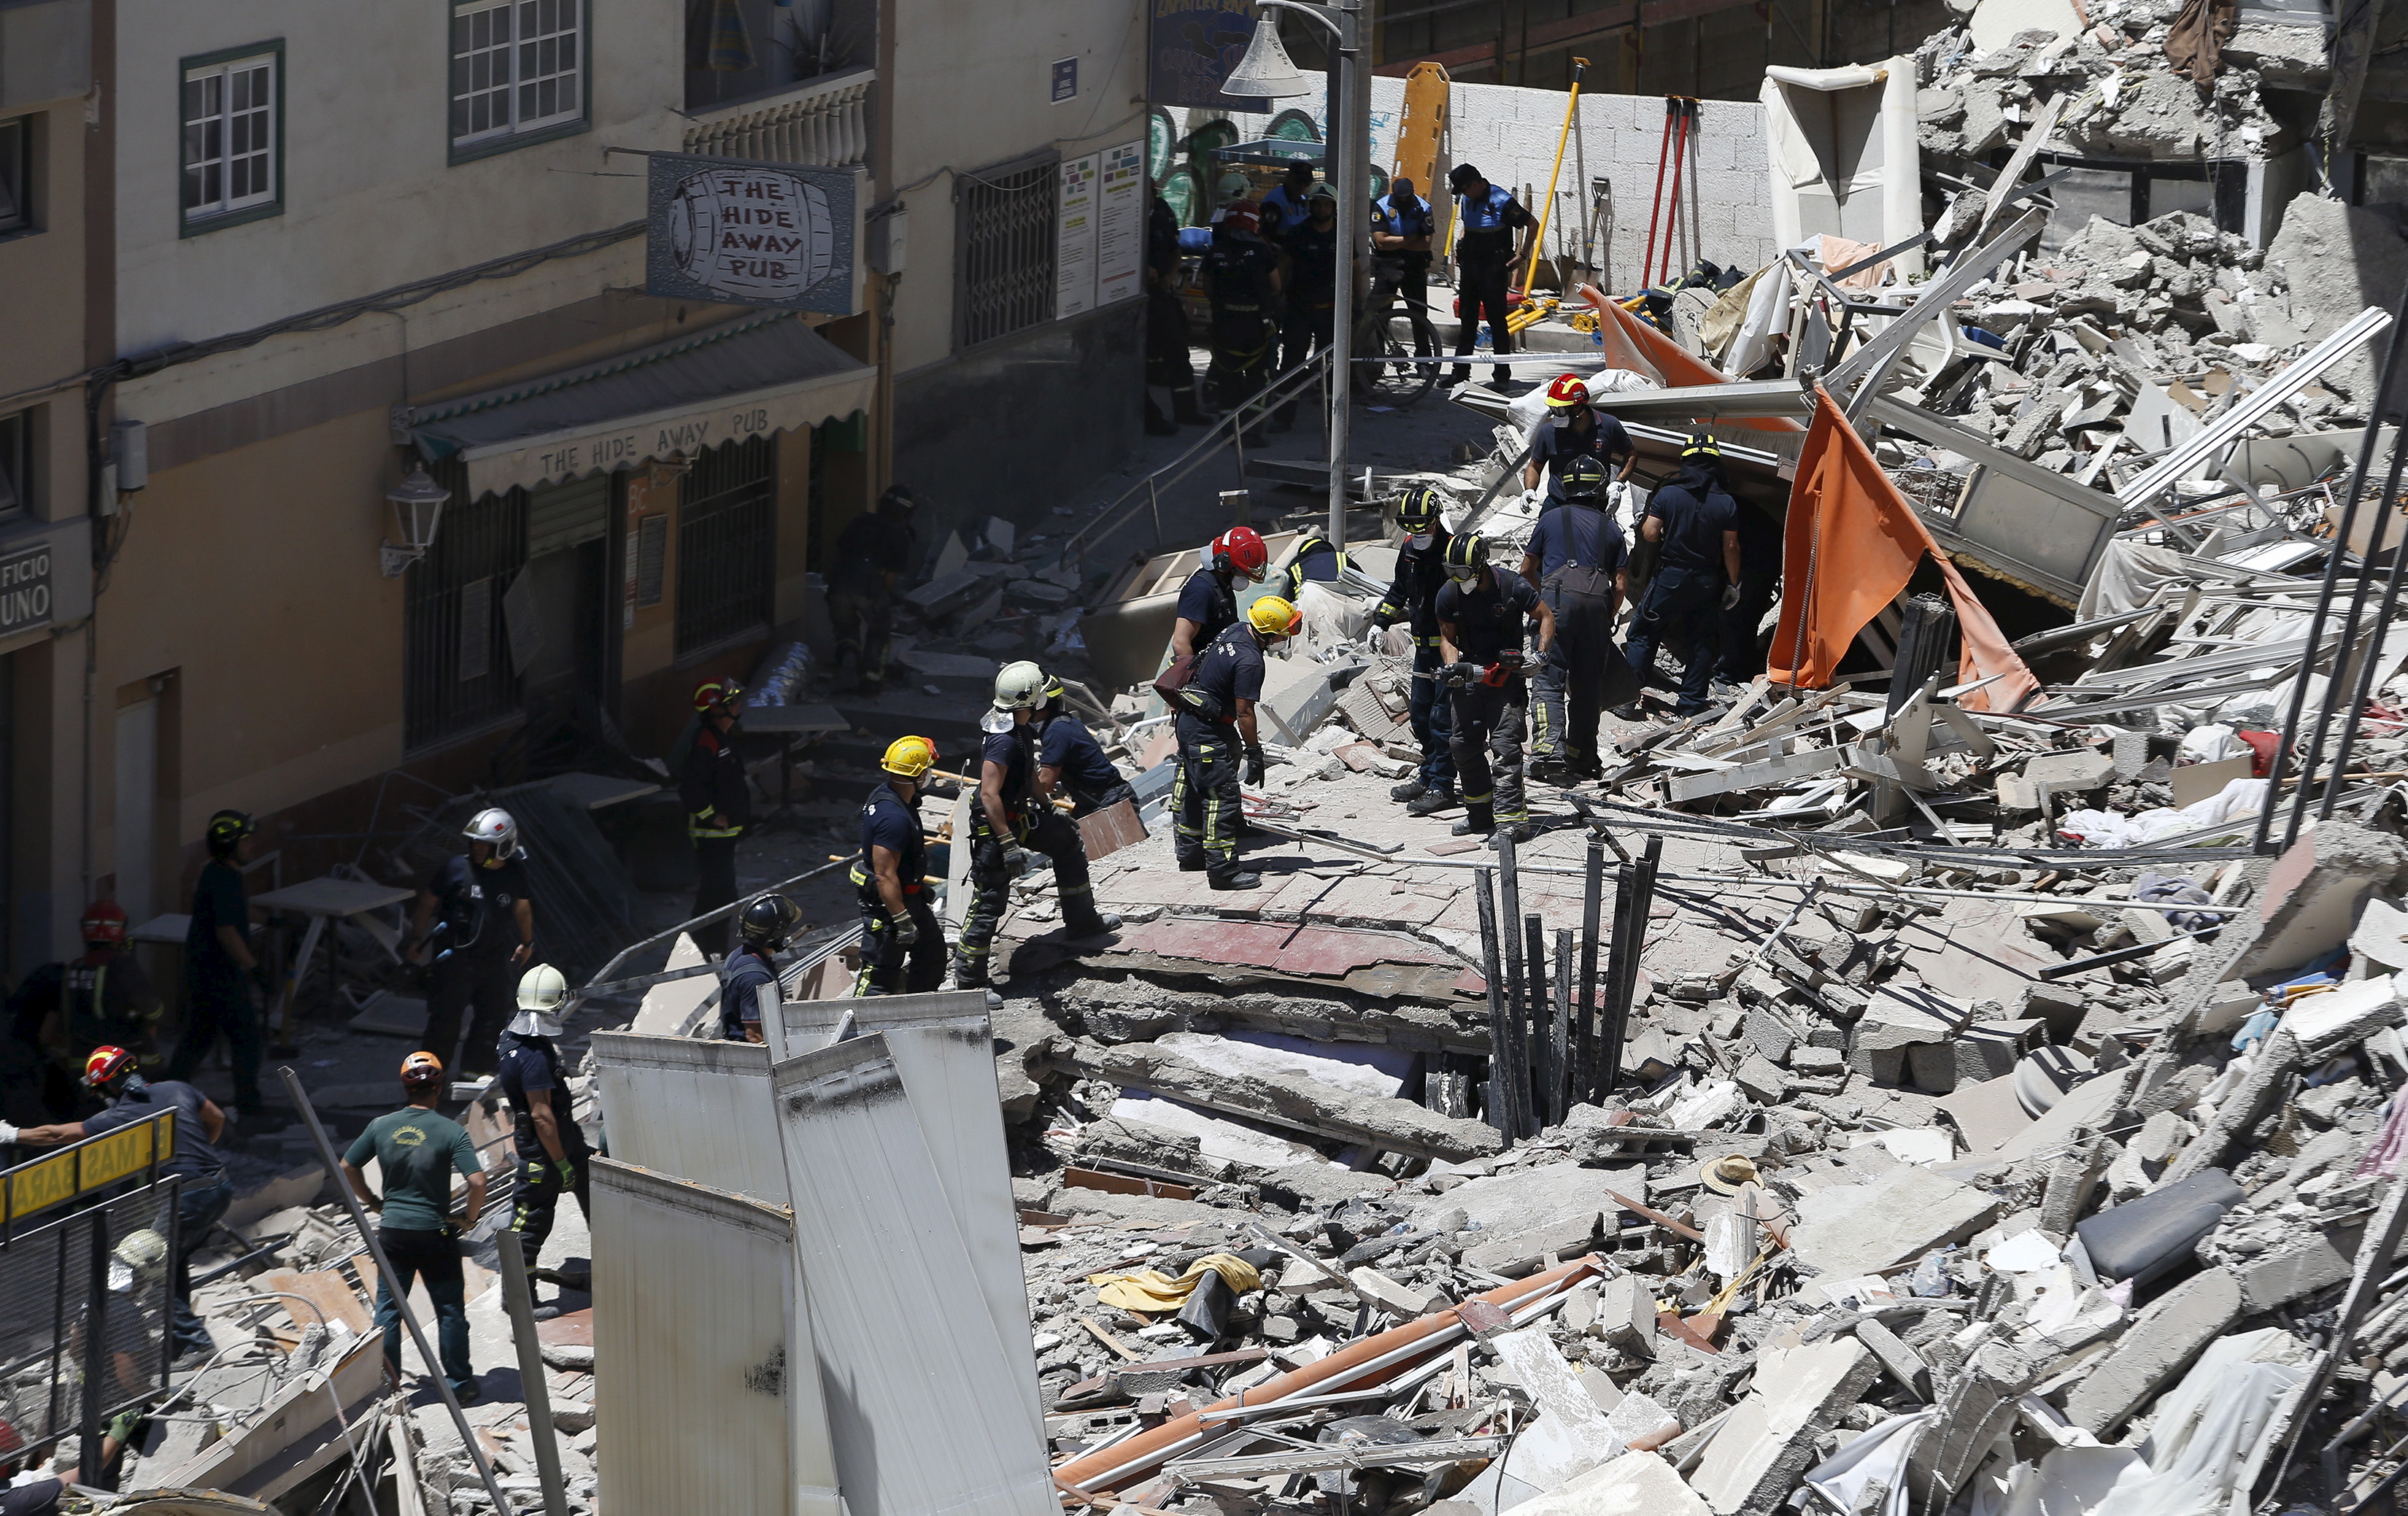 Firefighters and rescue workers search for survivors after a building collapsed in Los Cristianos, in the Canary Island of Tenerife, Spain, April 14, 2016. REUTERS/Santiago Ferrero - RTX29ZFC